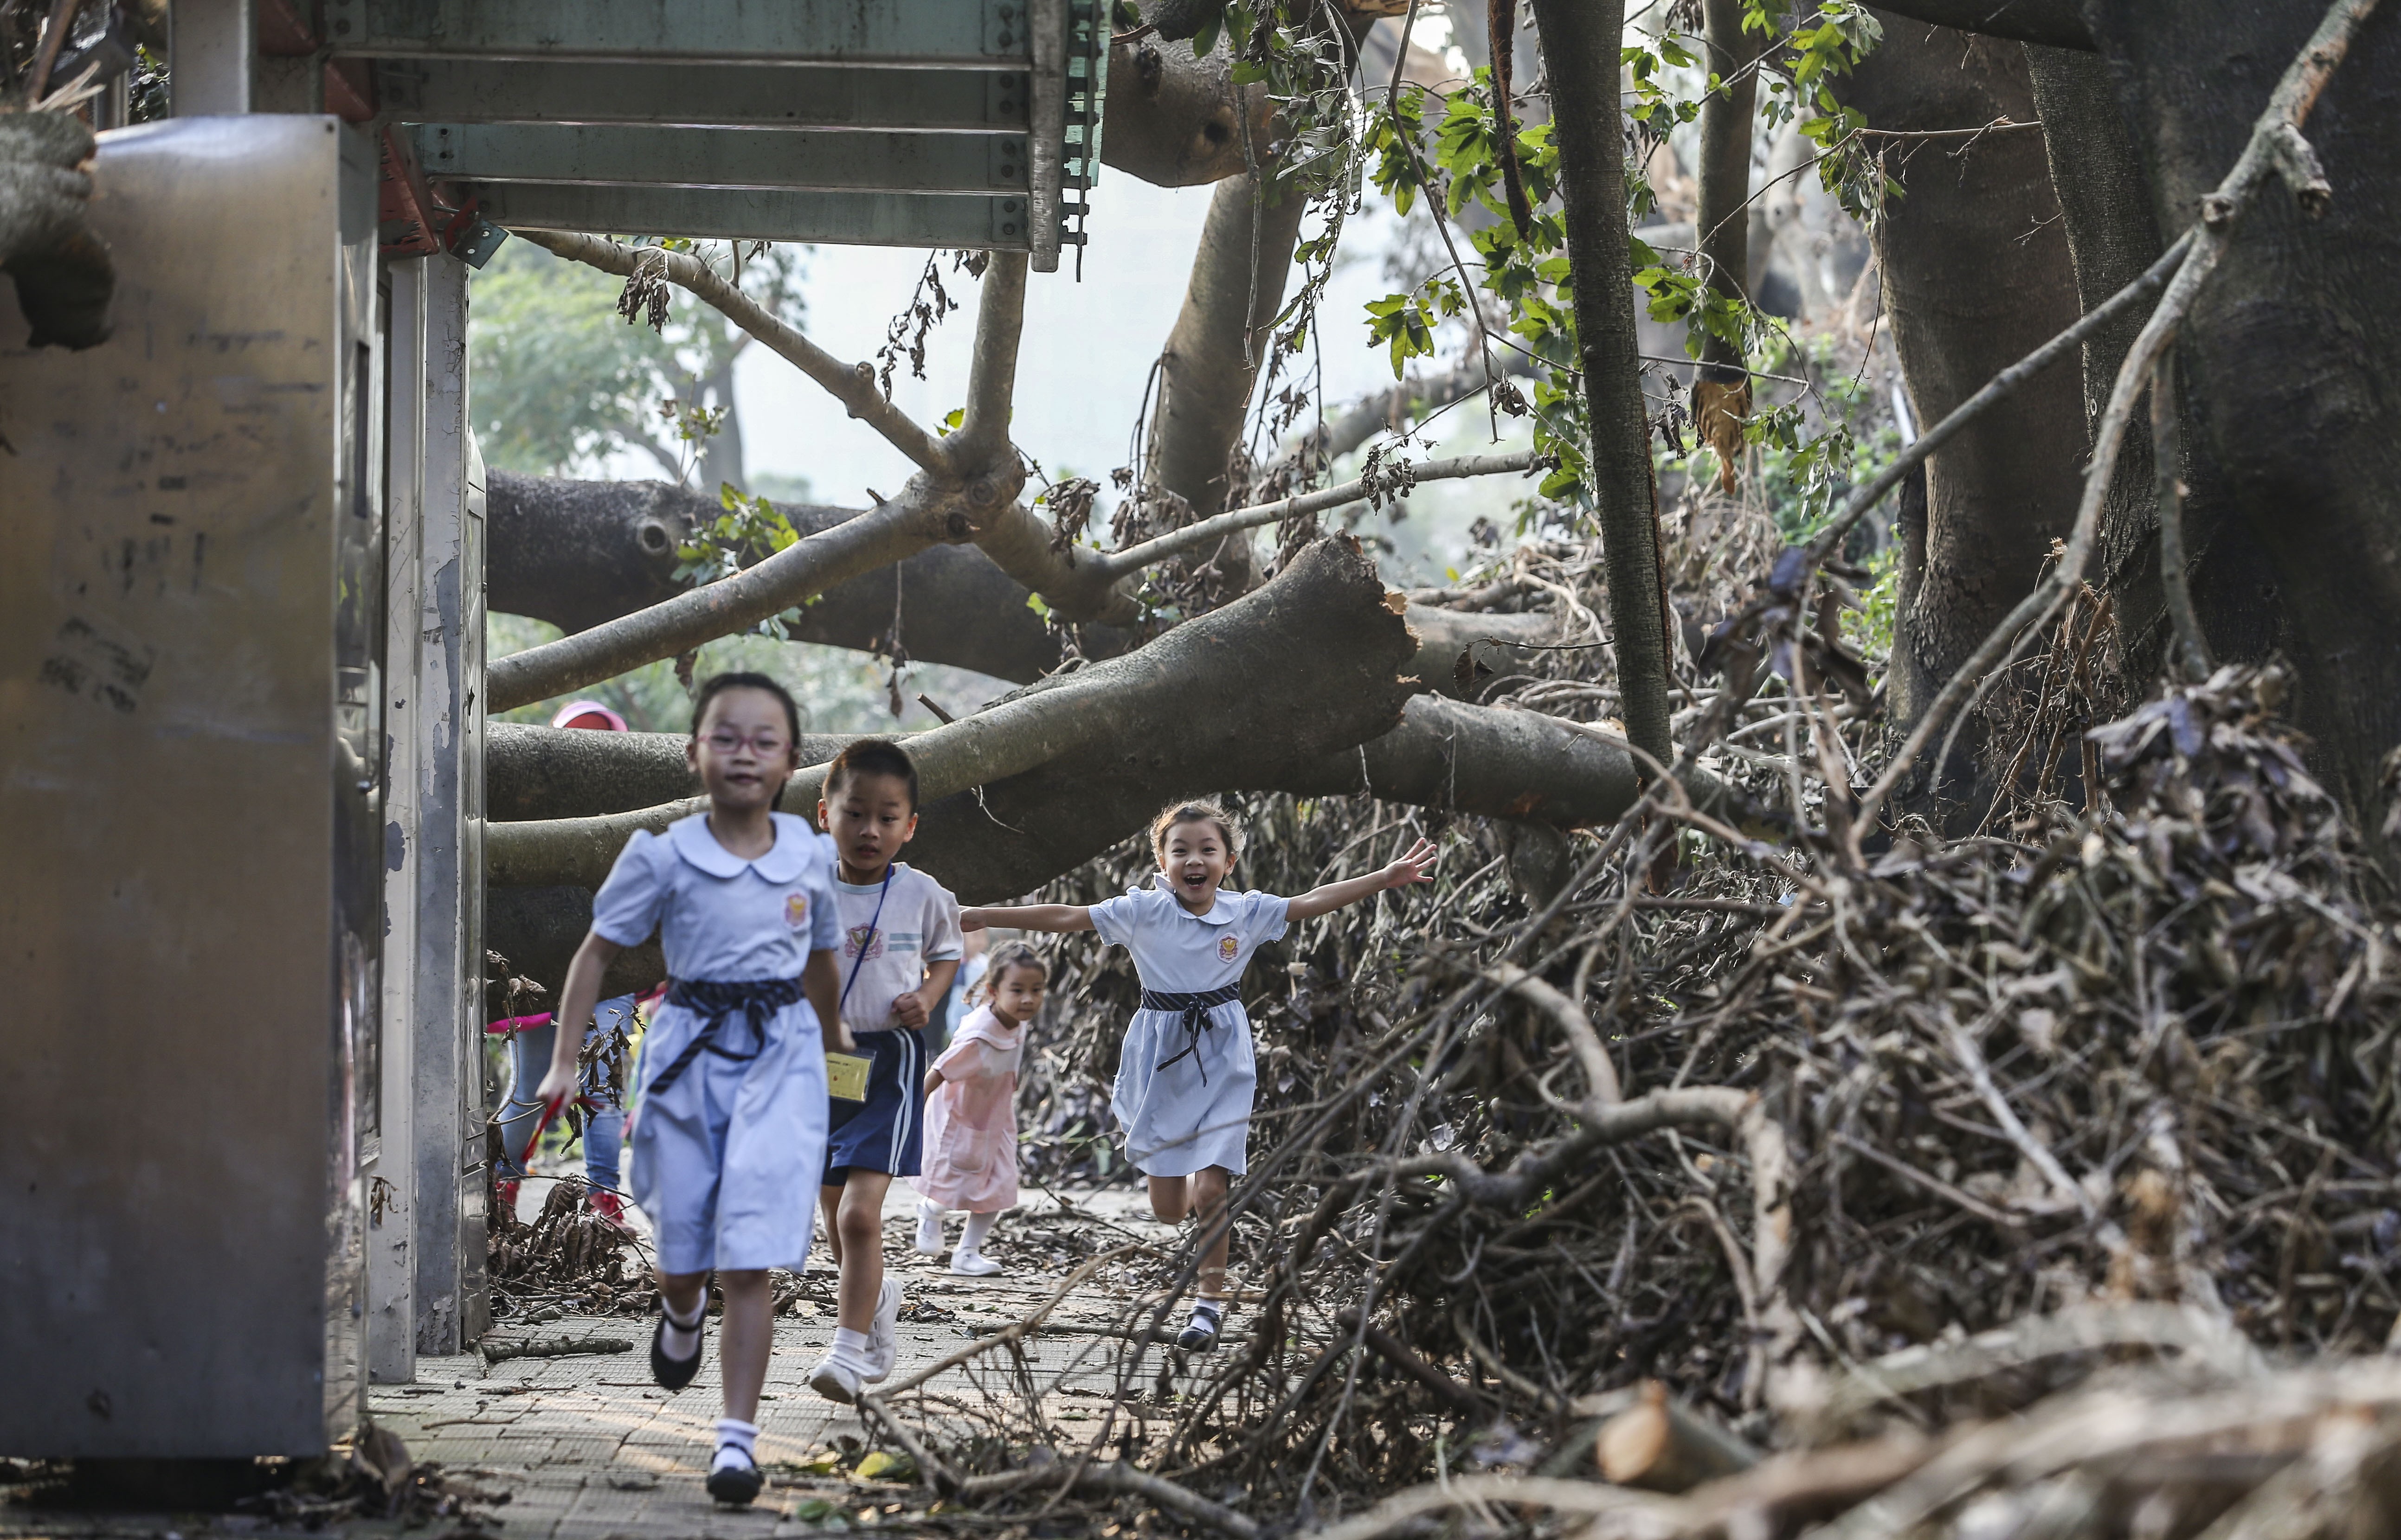 Children walk under collapsed trees along Tin Ping Road in Sheung Shui after Typhoon Mangkhut. Photo: Sam Tsang